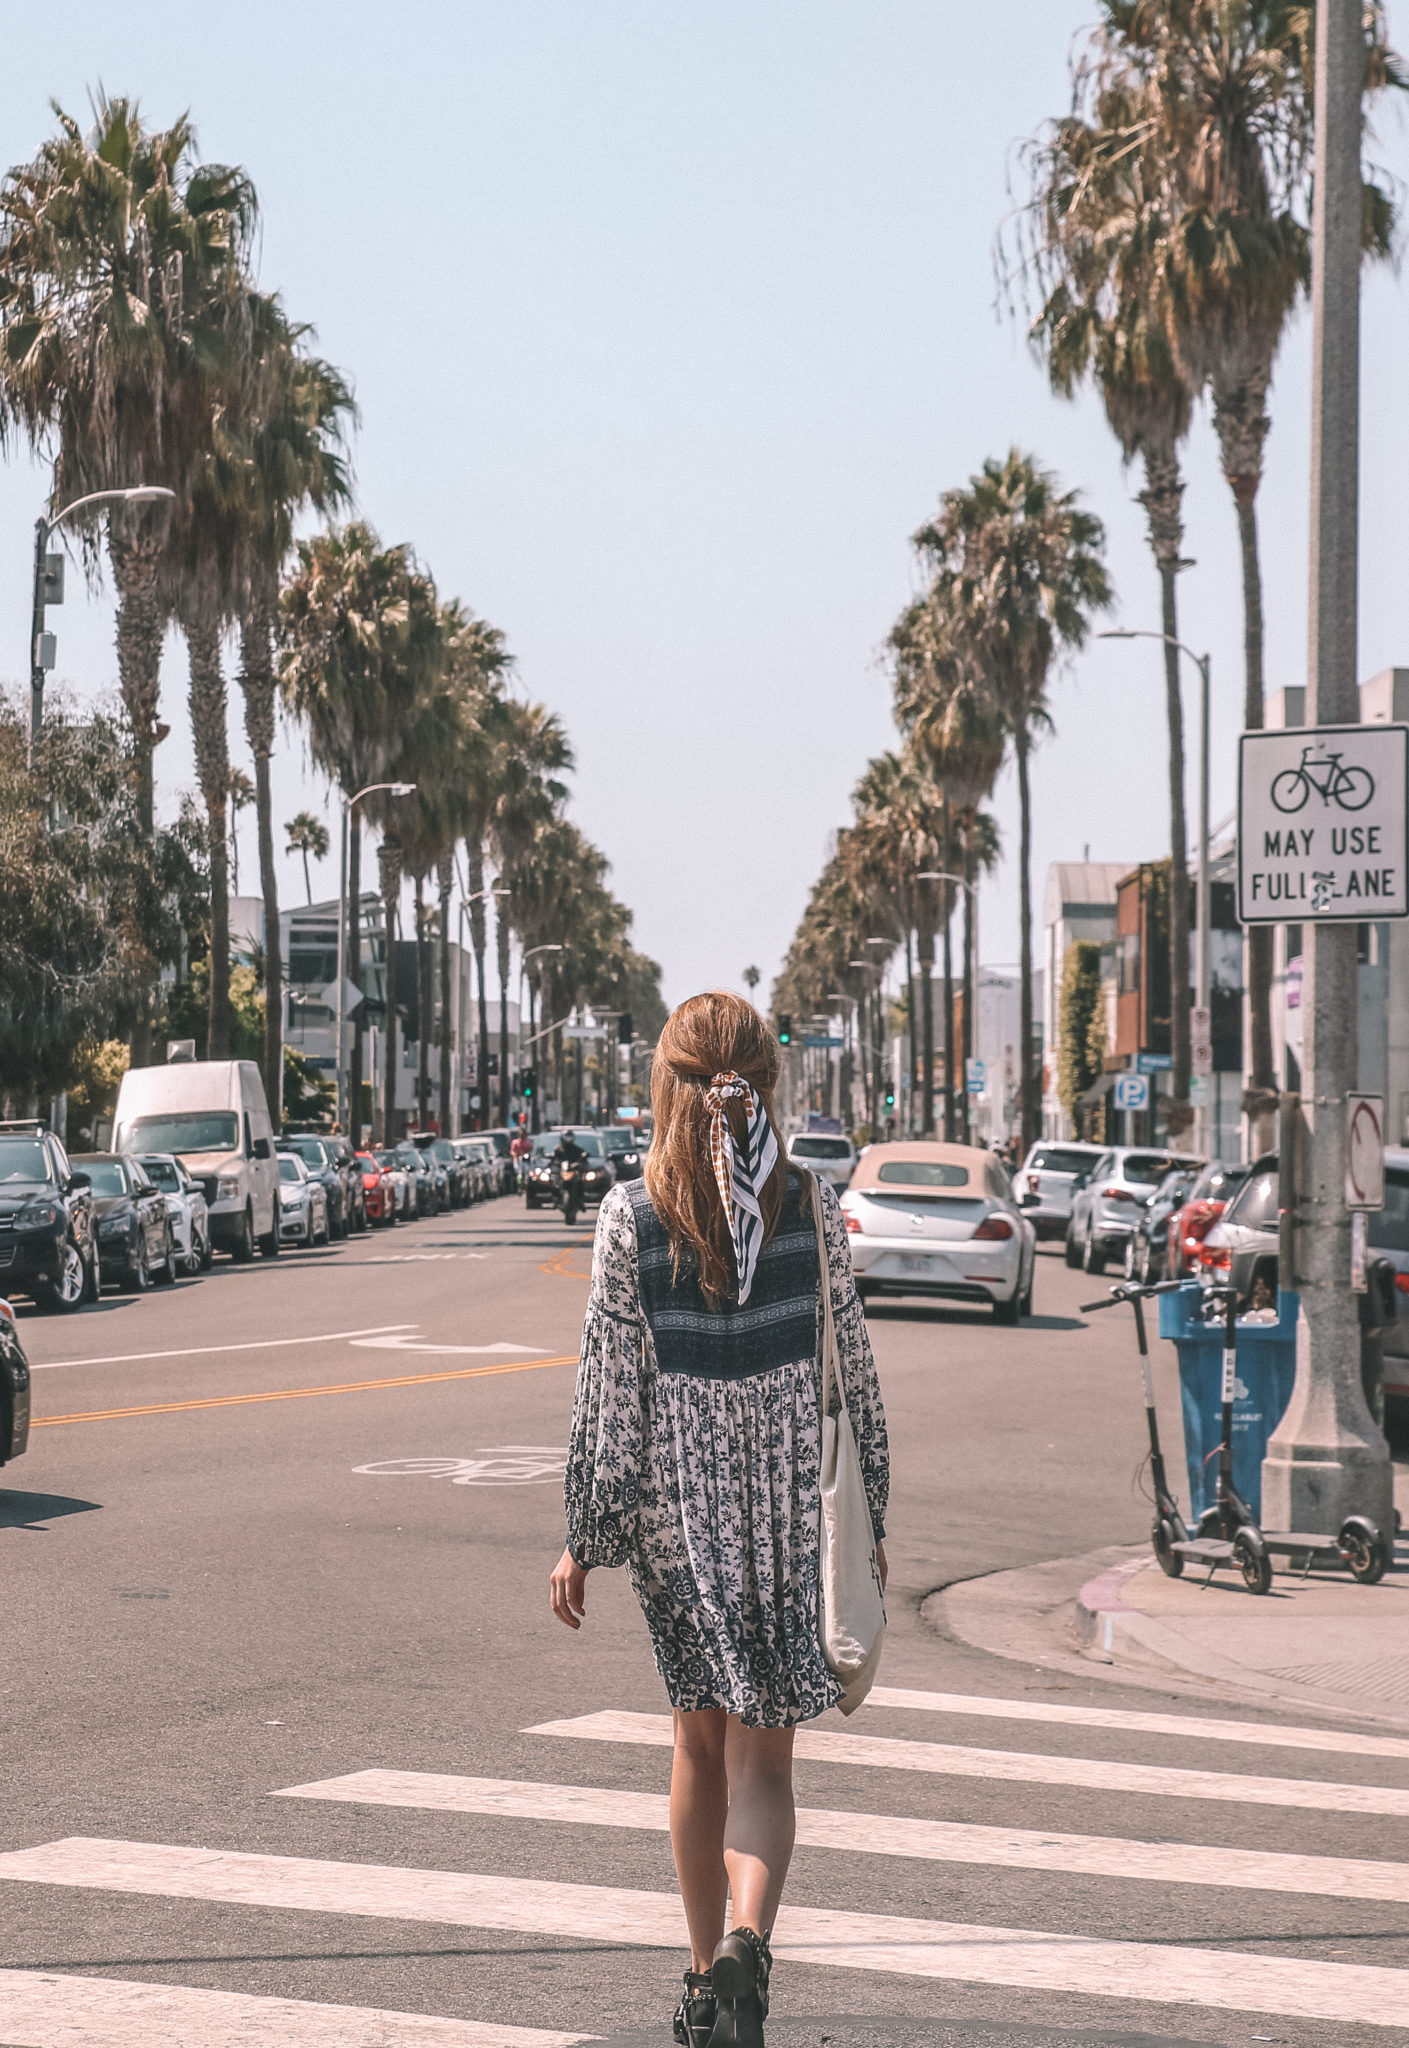 How to Spend a Weekend in Venice Beach